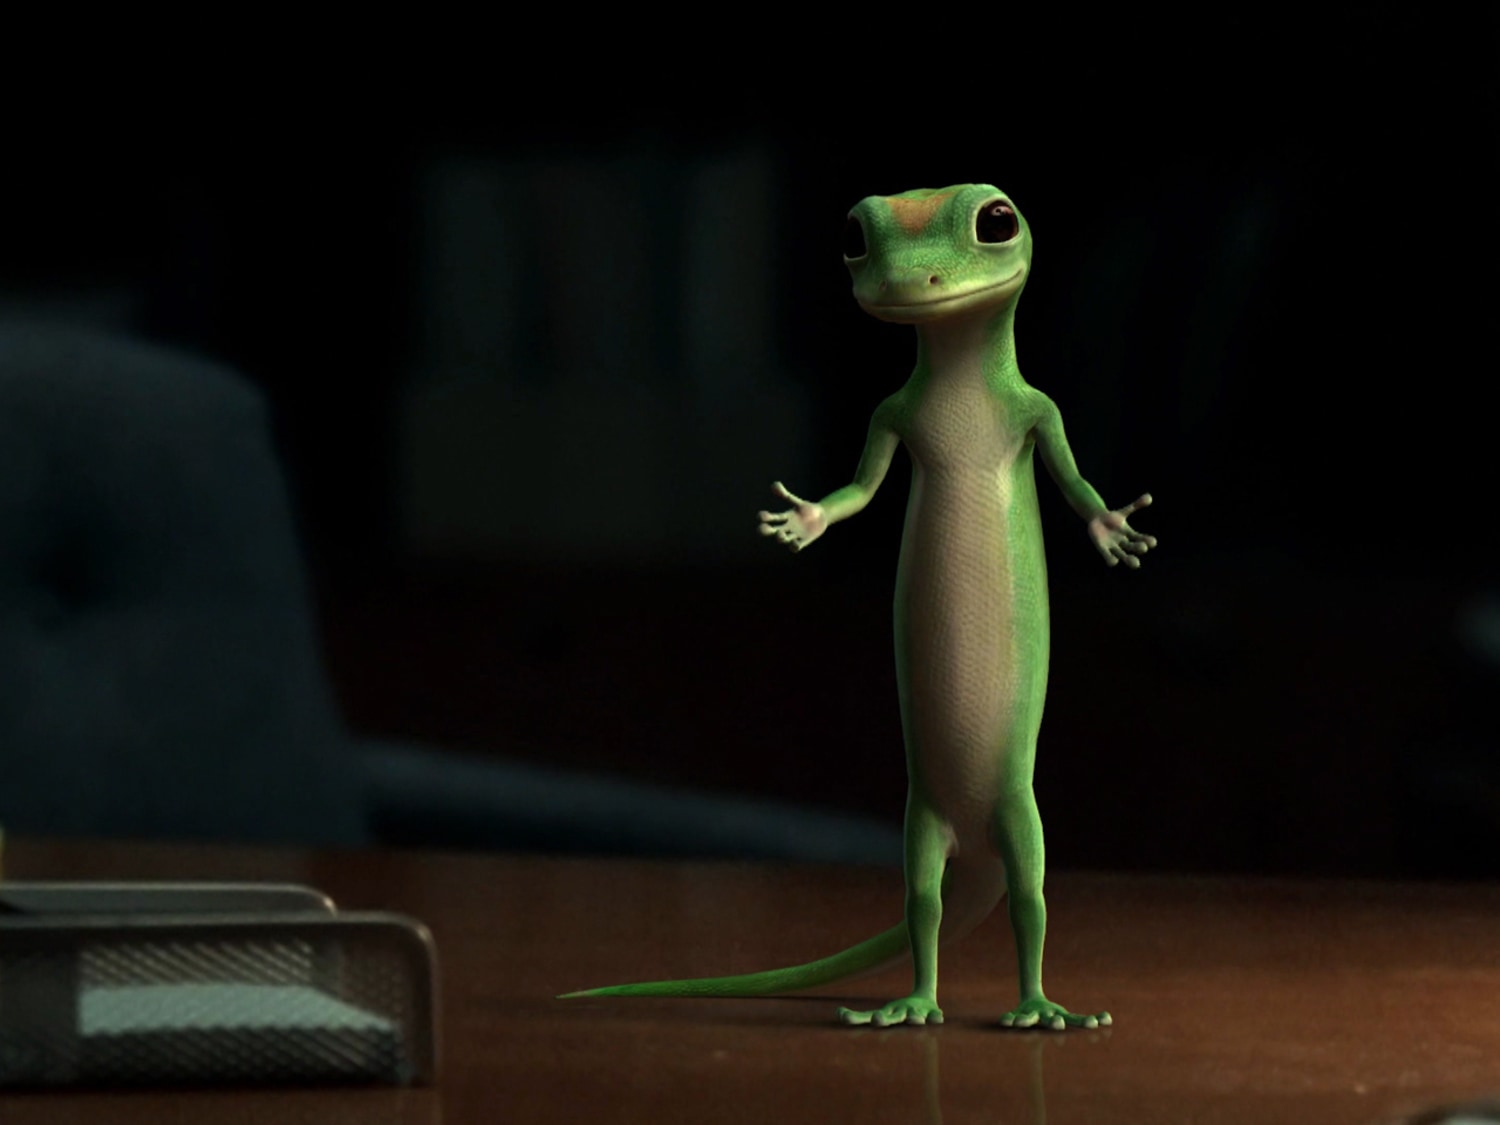 geico 15 percent or more